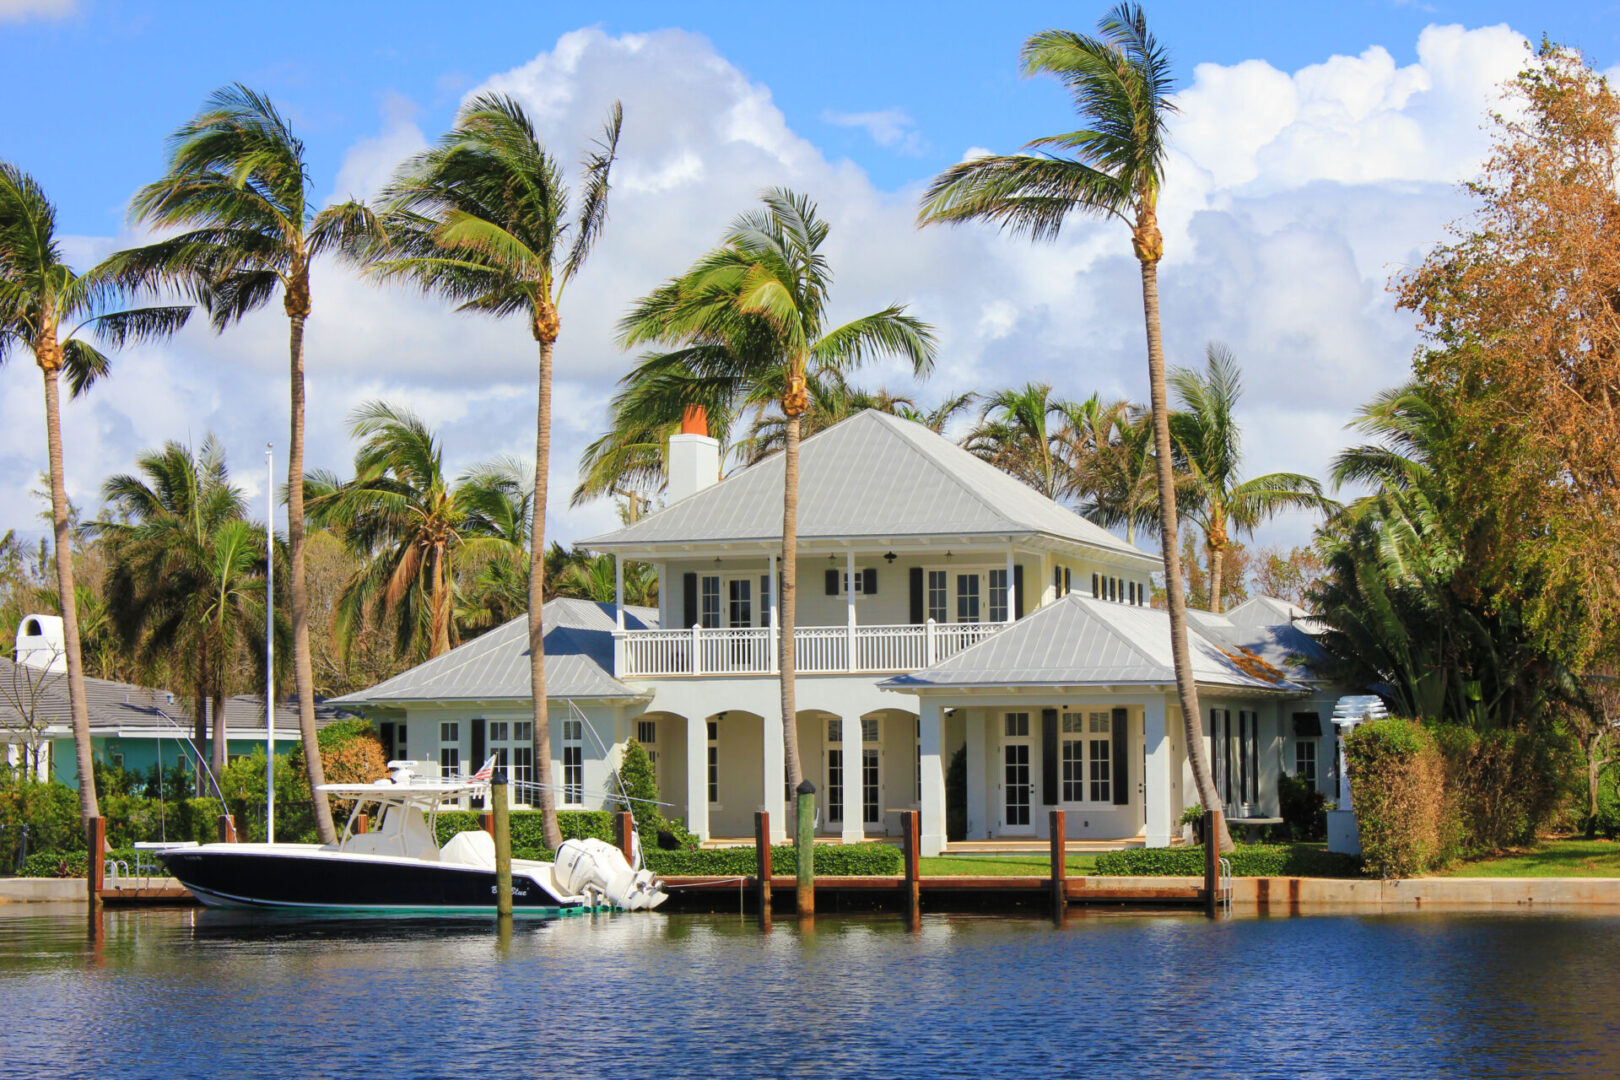 A house with palm trees and boats in the water.